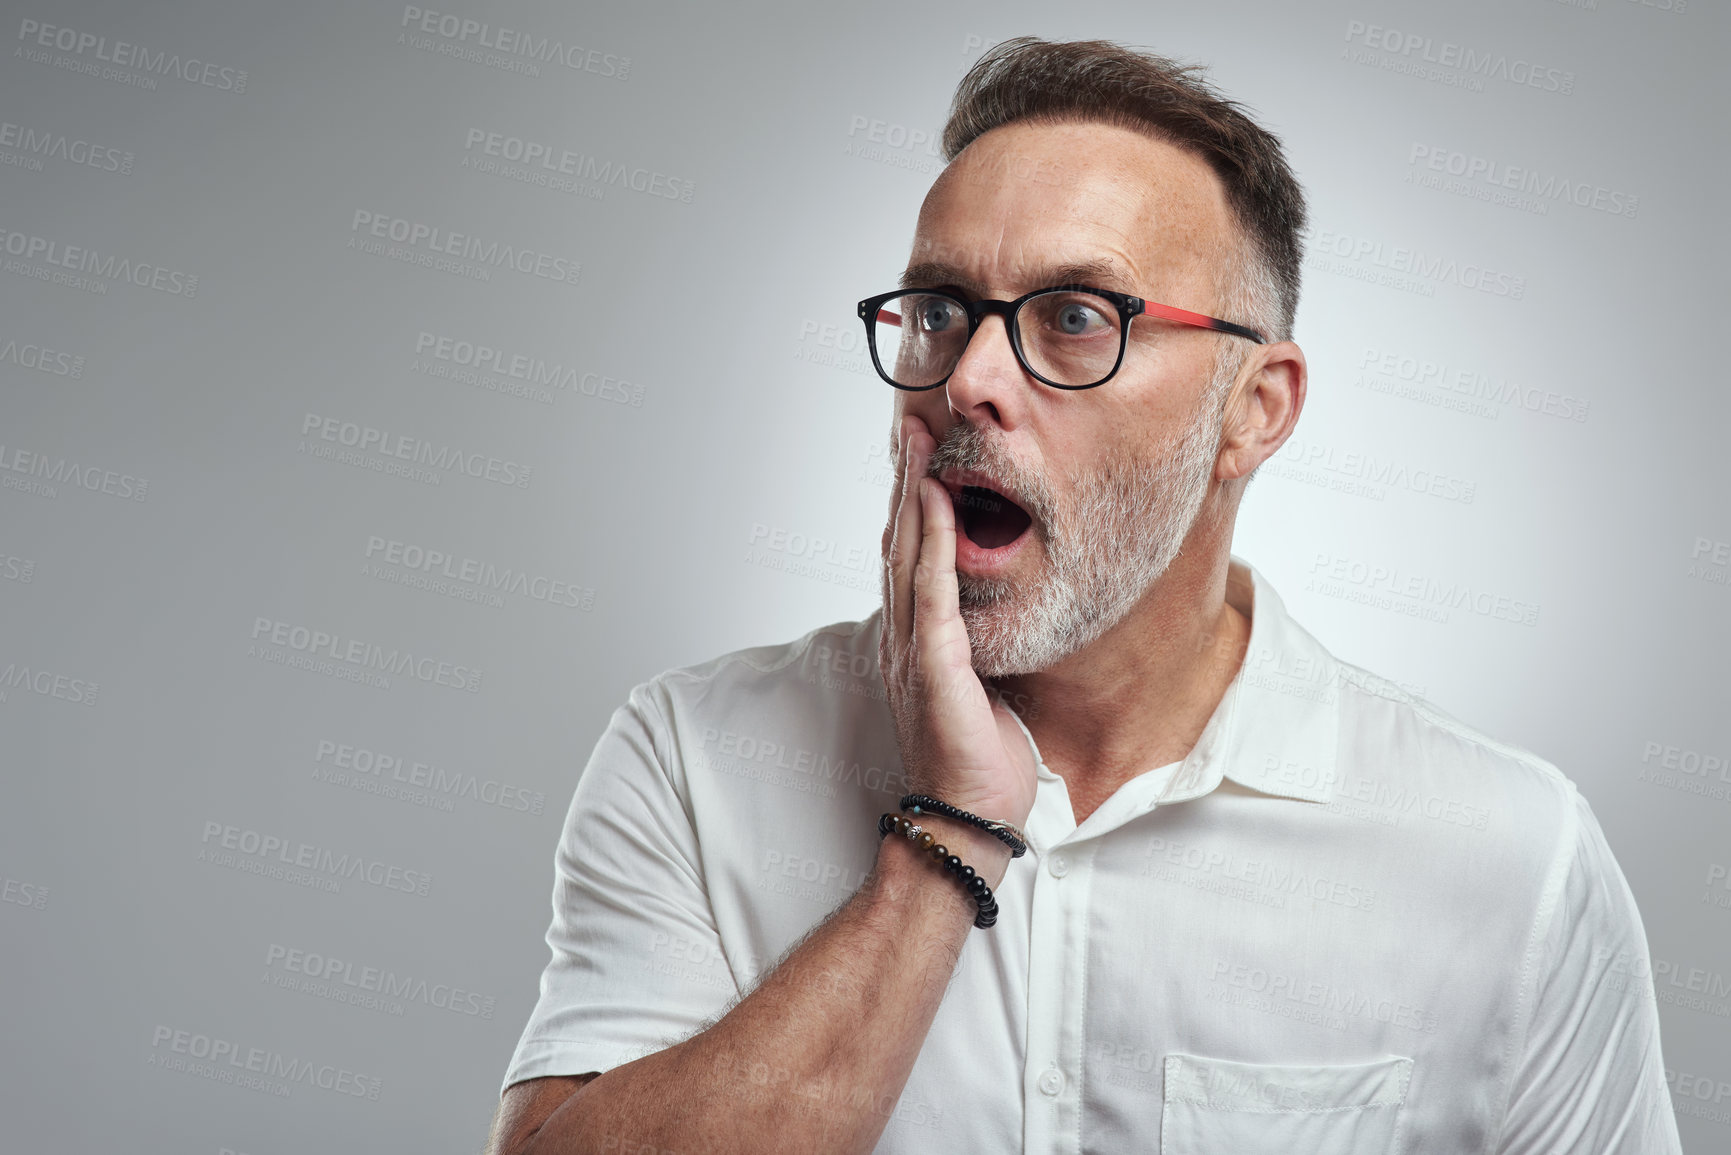 Buy stock photo Studio shot of a mature man looking surprised against a grey background